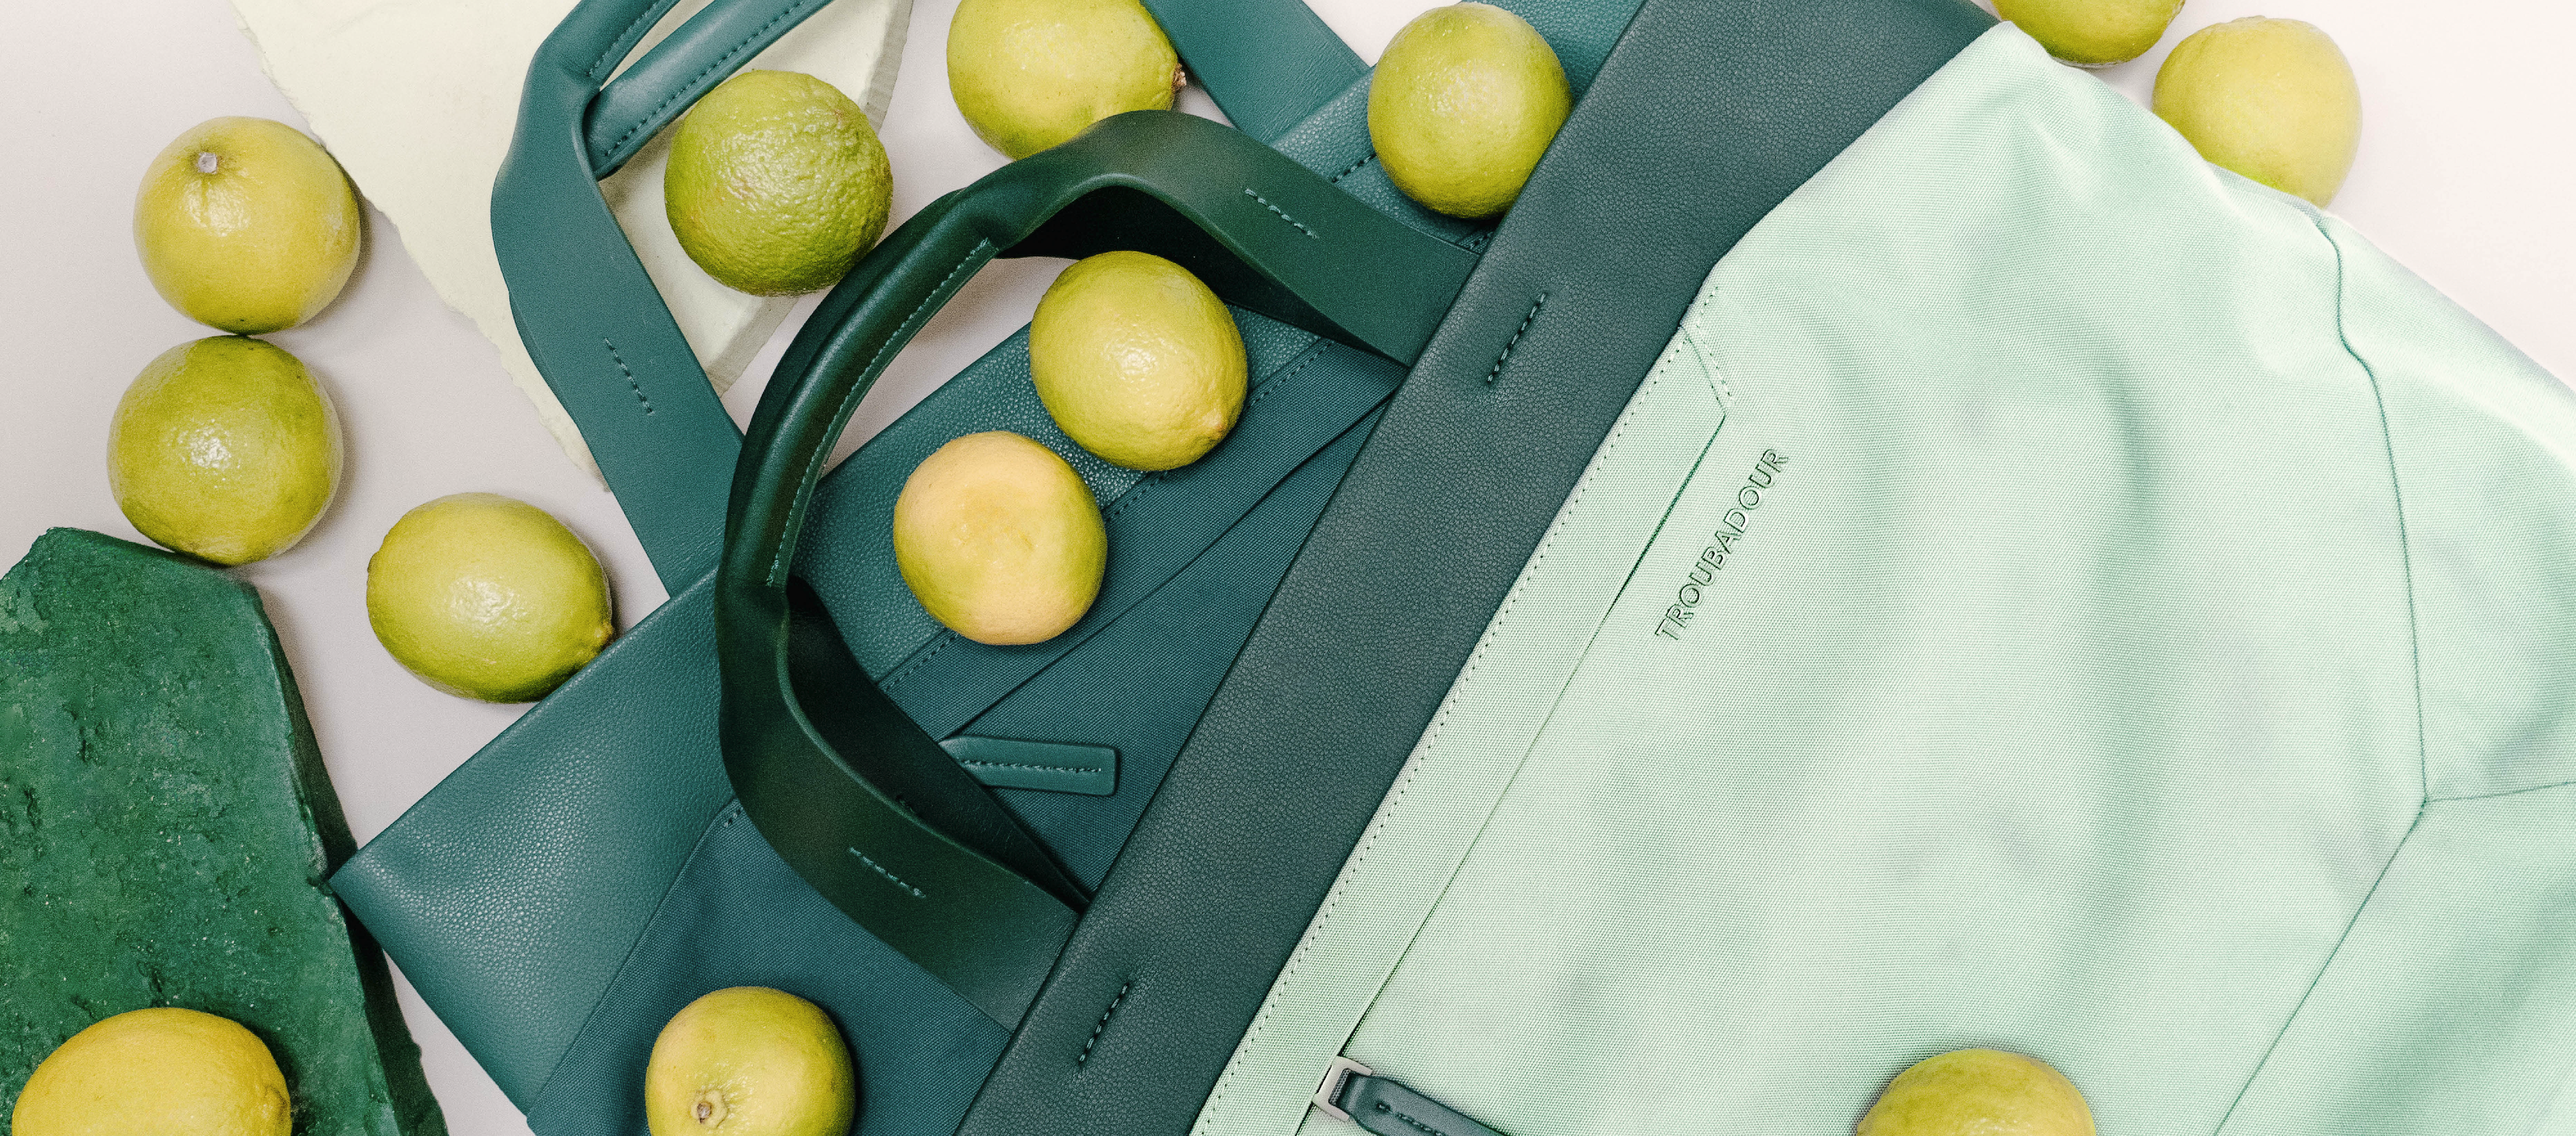 Anytime, Anywhere, it’s Always Ready. The new Apex Tote Is Your Everyday Companion.

